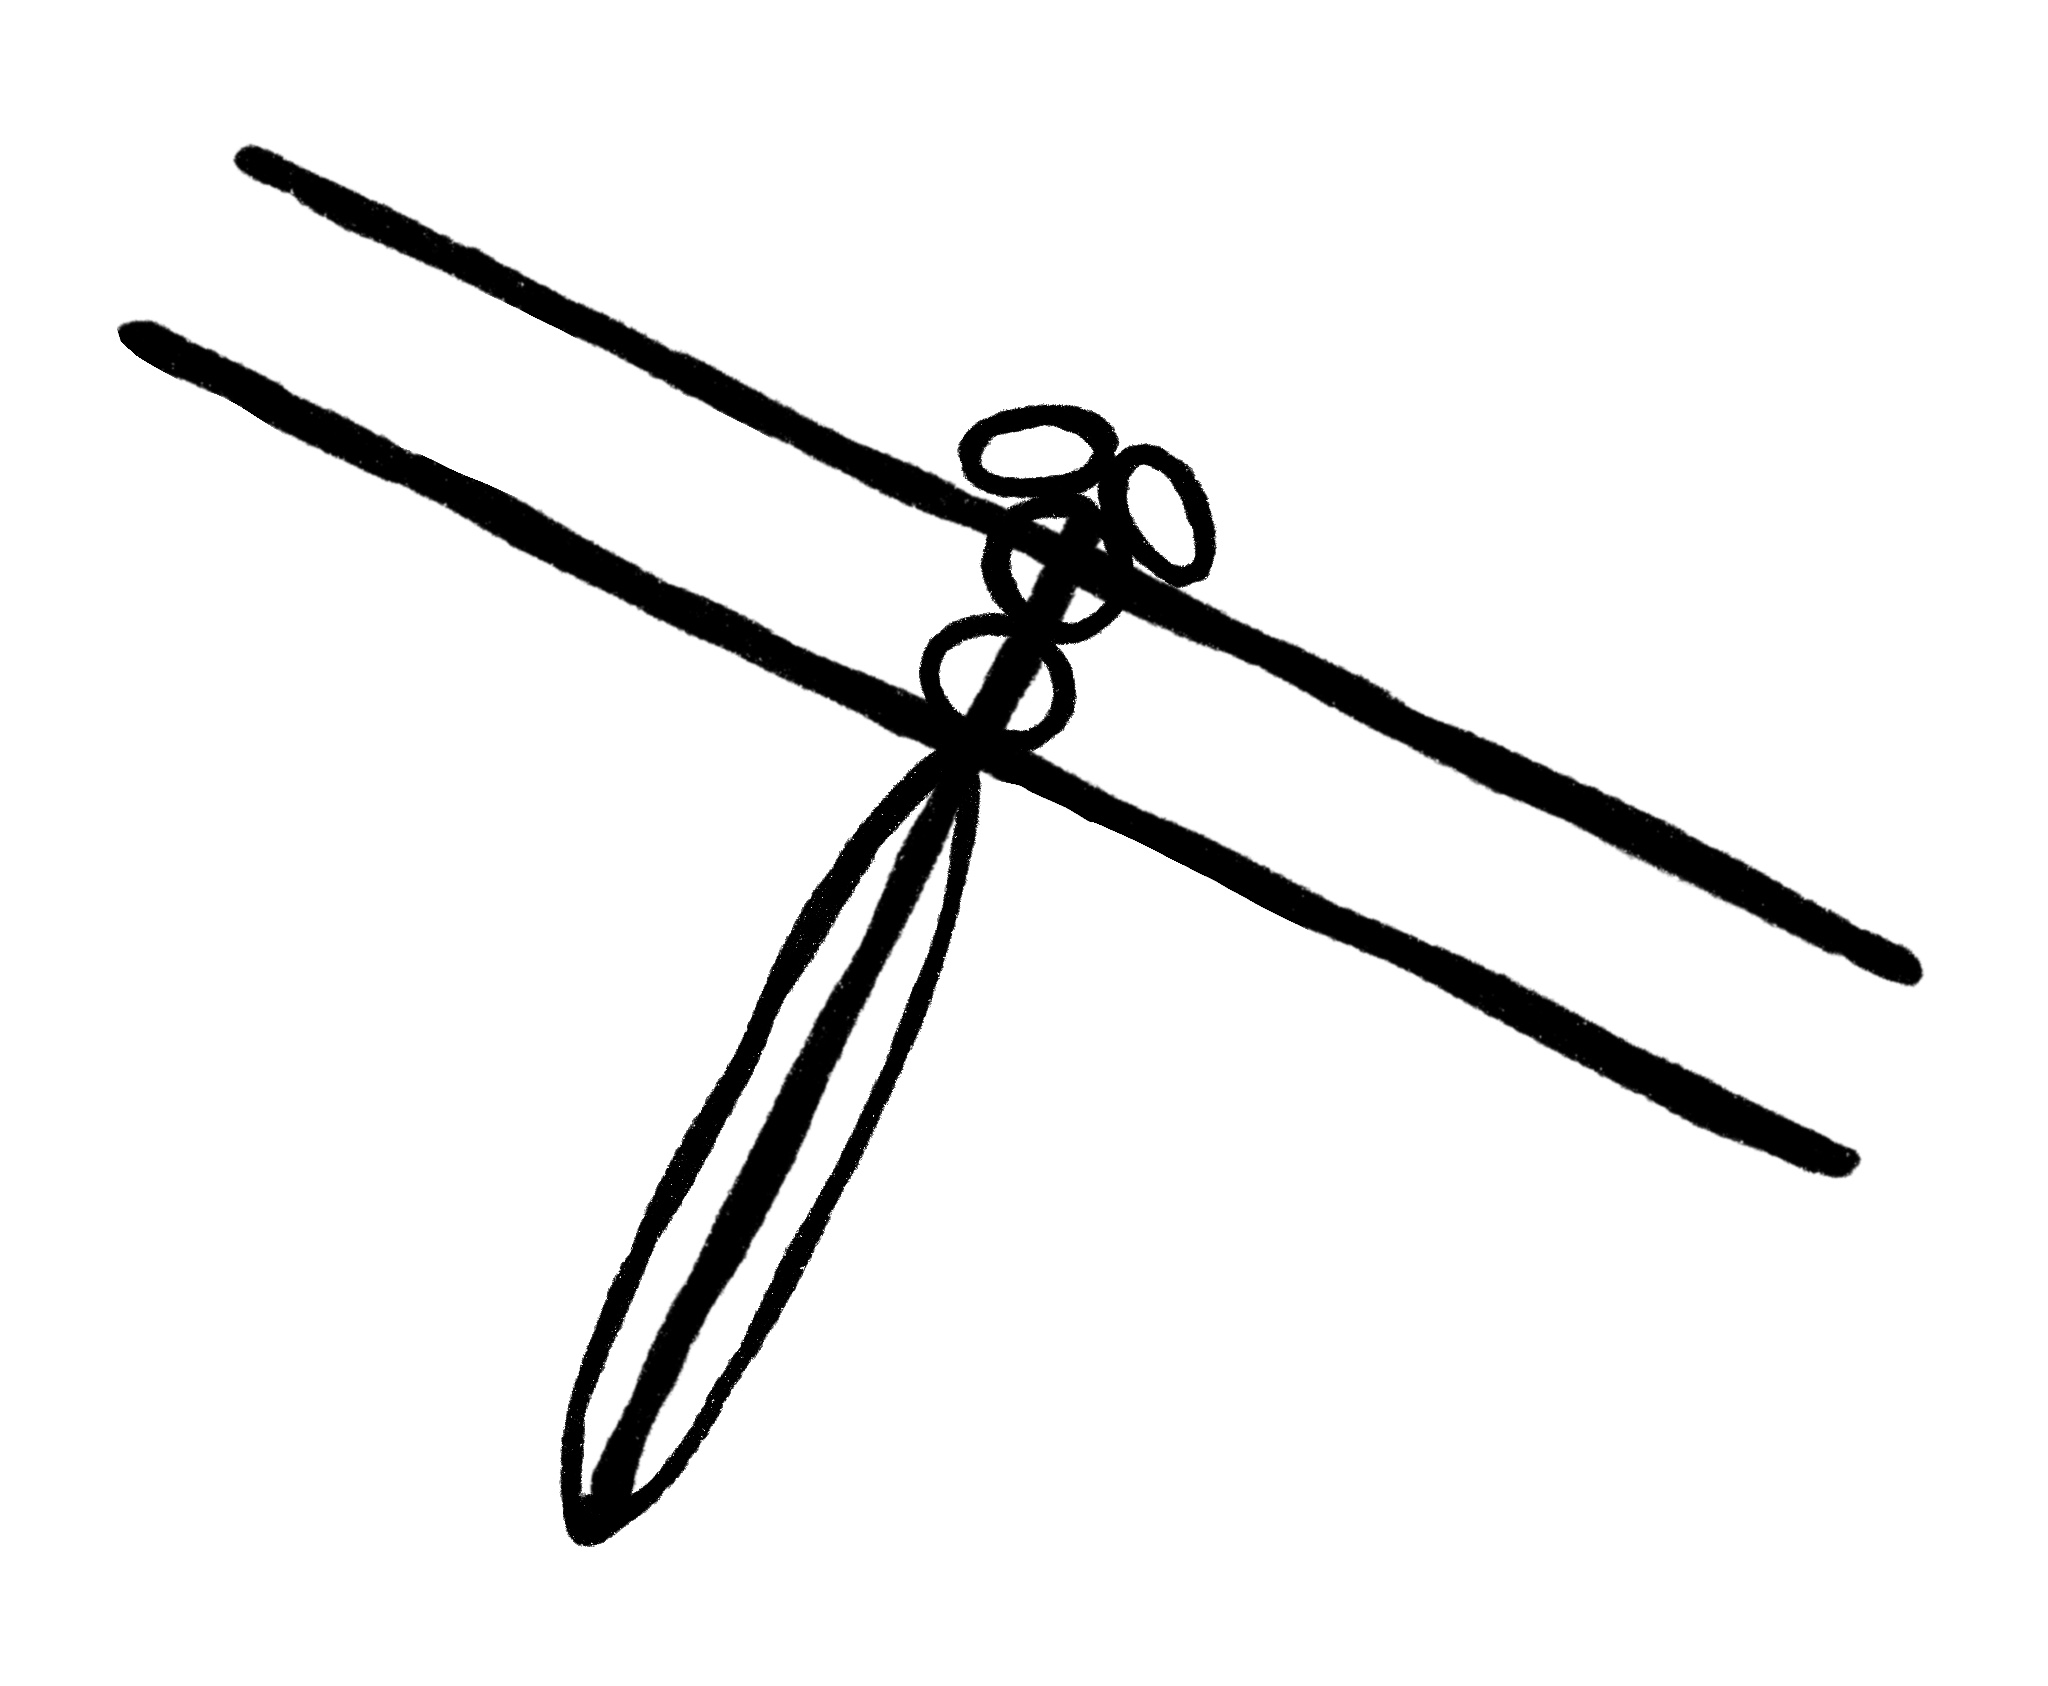 Dragonfly Drawing Step 2